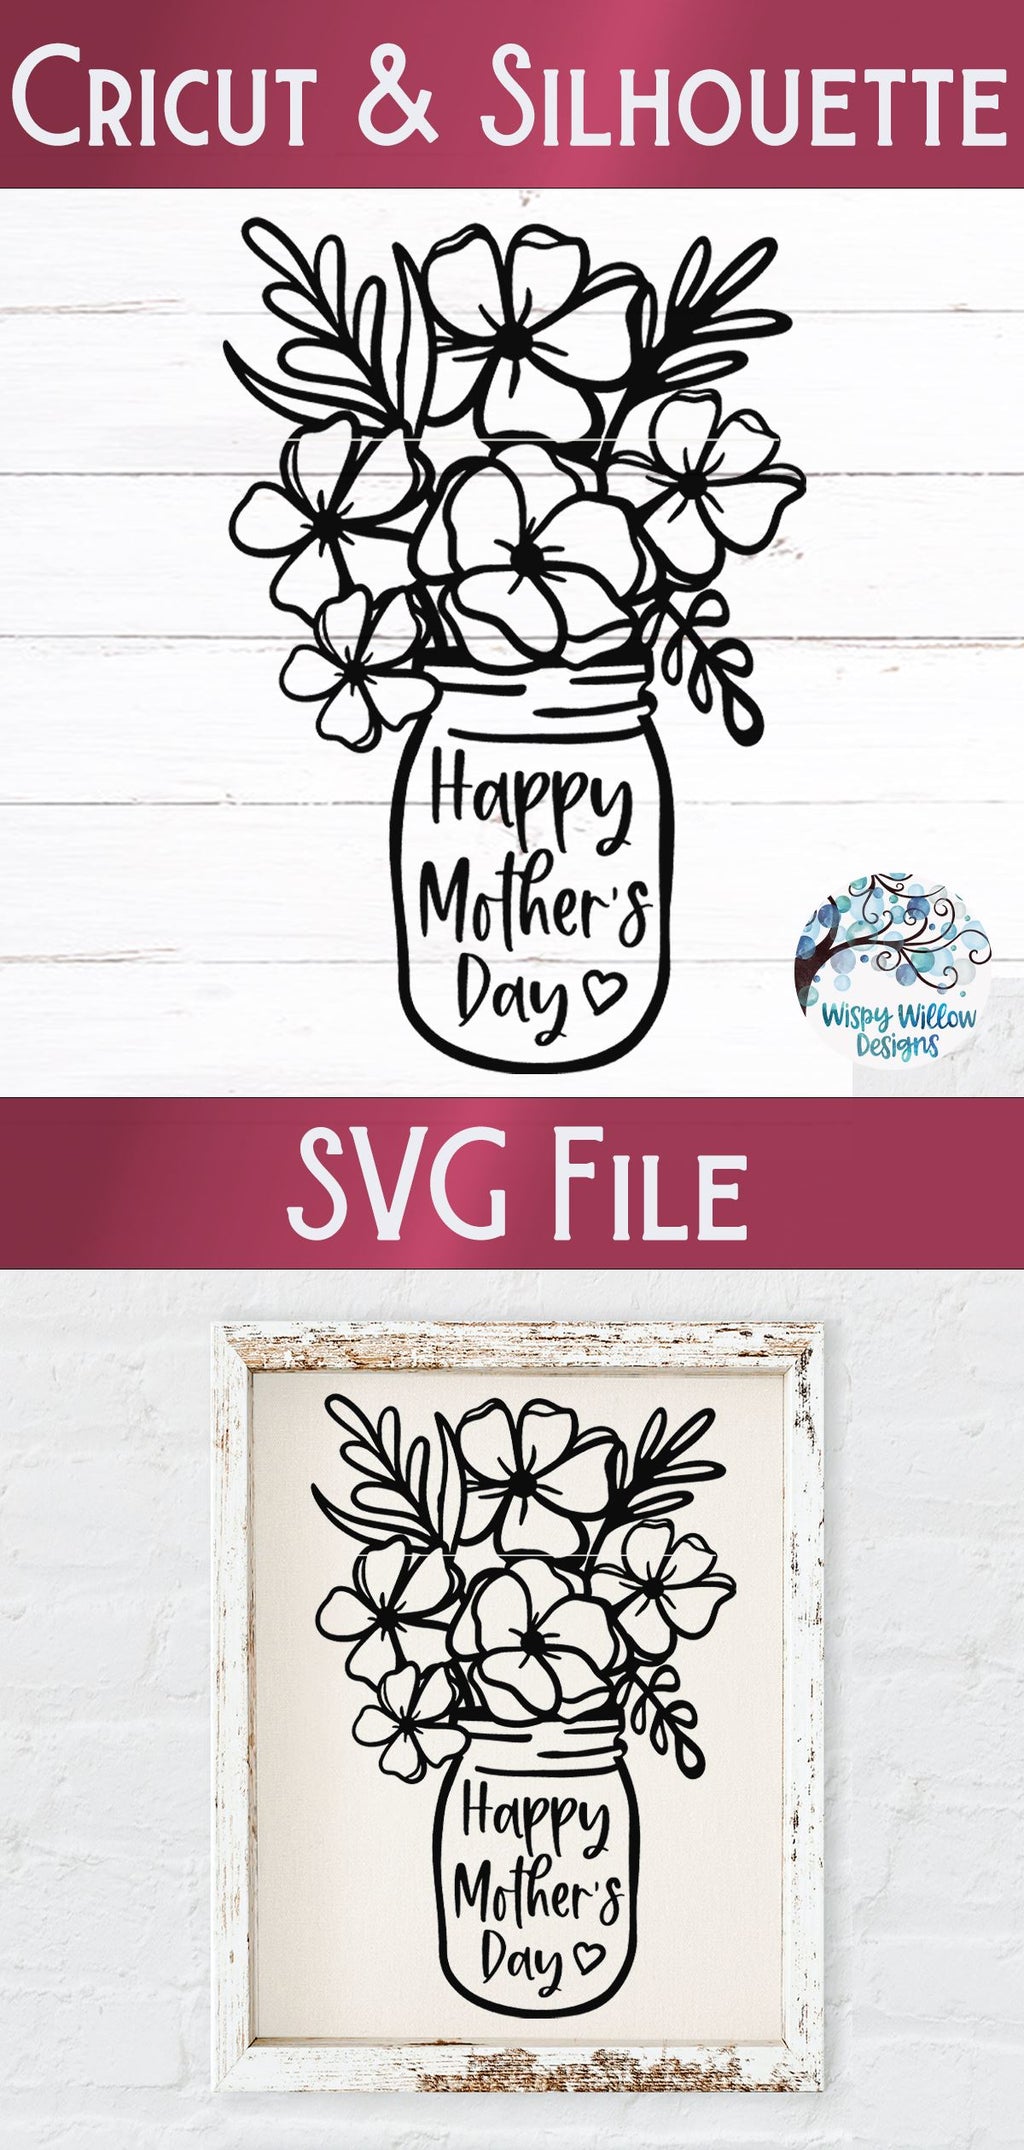 Happy Mother's Day Flowers in Mason Jar SVG - So Fontsy